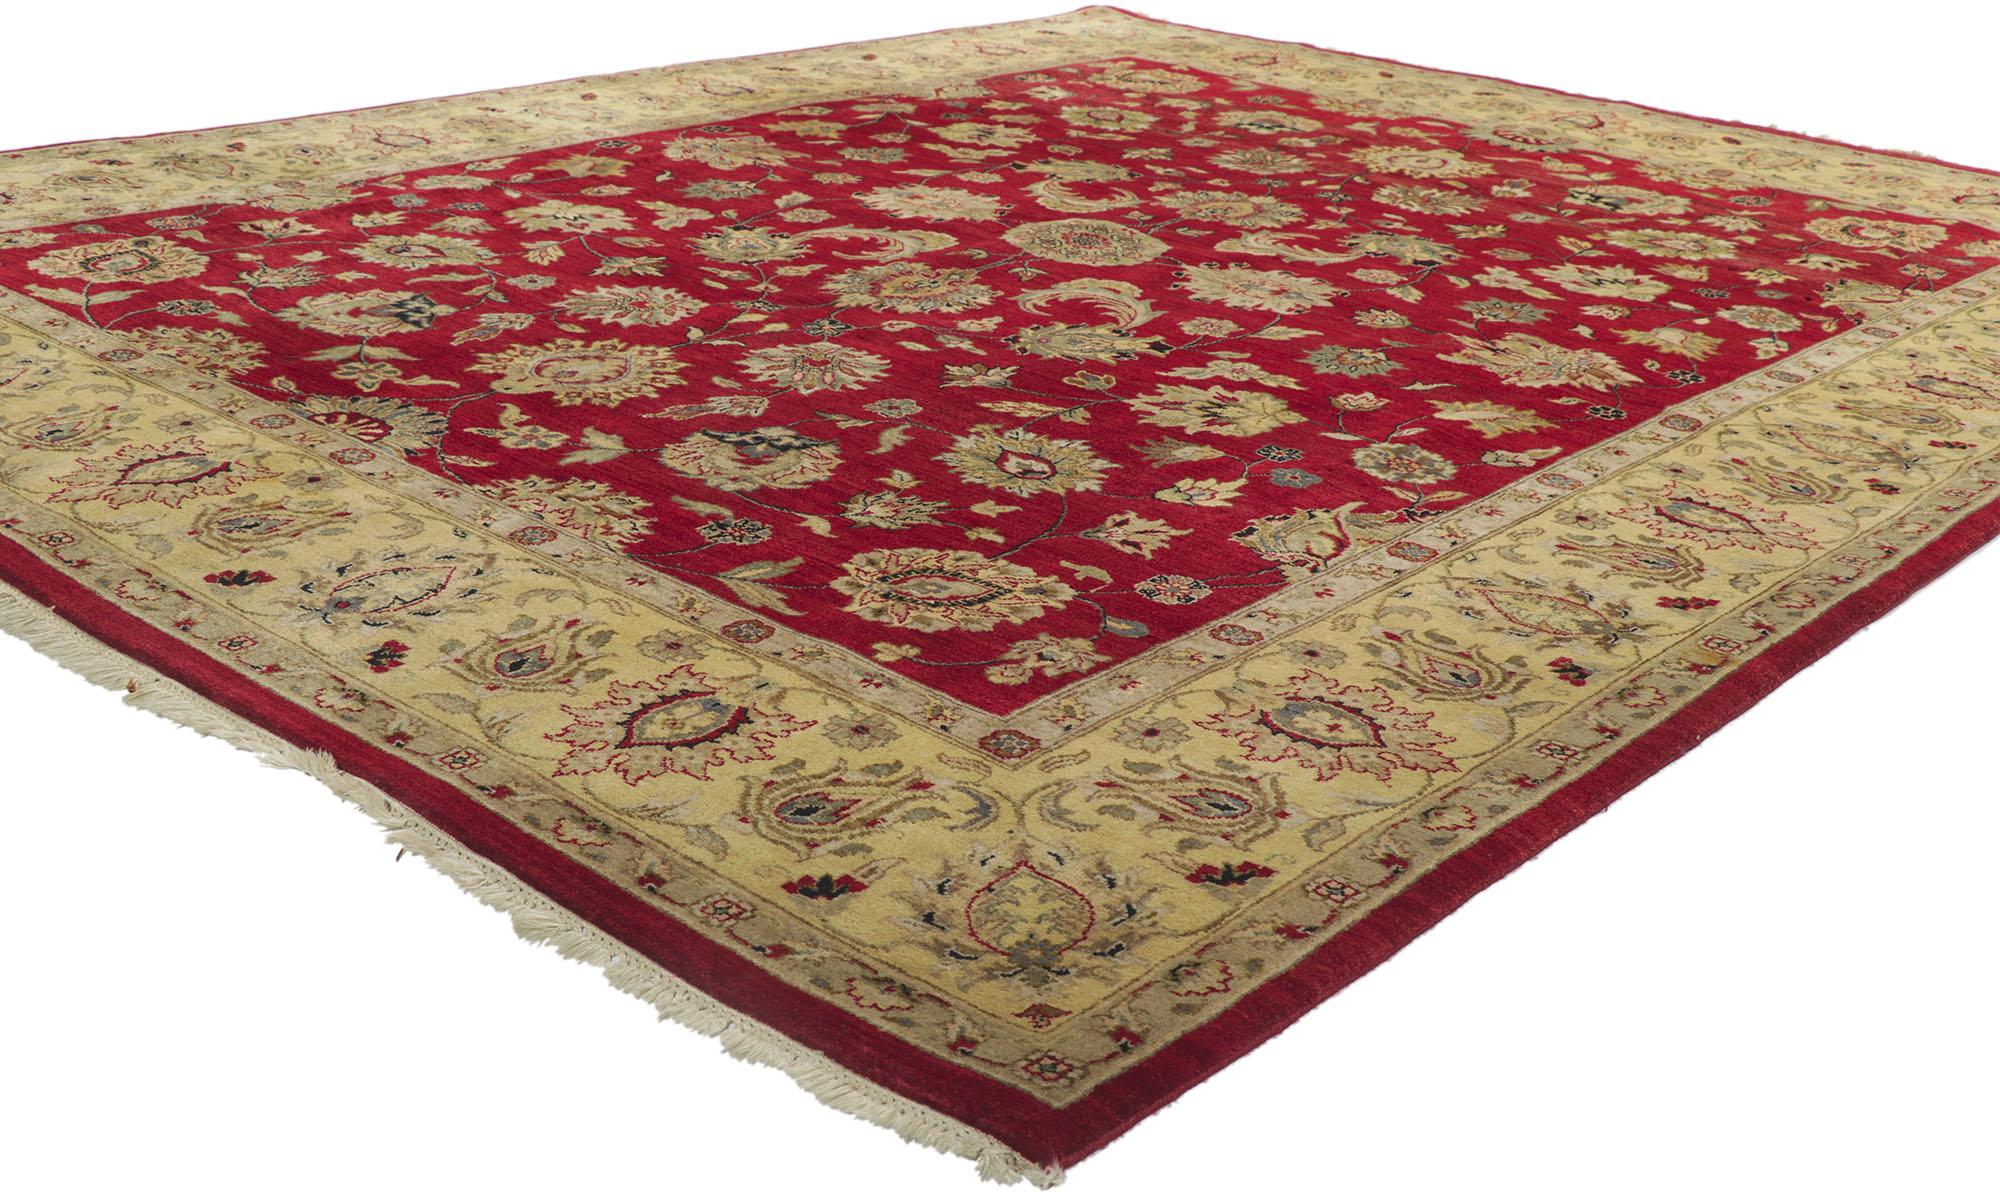 78241 Vintage Indian Rug, 08'02 x 10'05.
Experience the timeless allure and nostalgic charm of our exquisite hand-knotted wool vintage Indian rug. Crafted with meticulous attention to detail, this rug showcases an intricate botanical design and